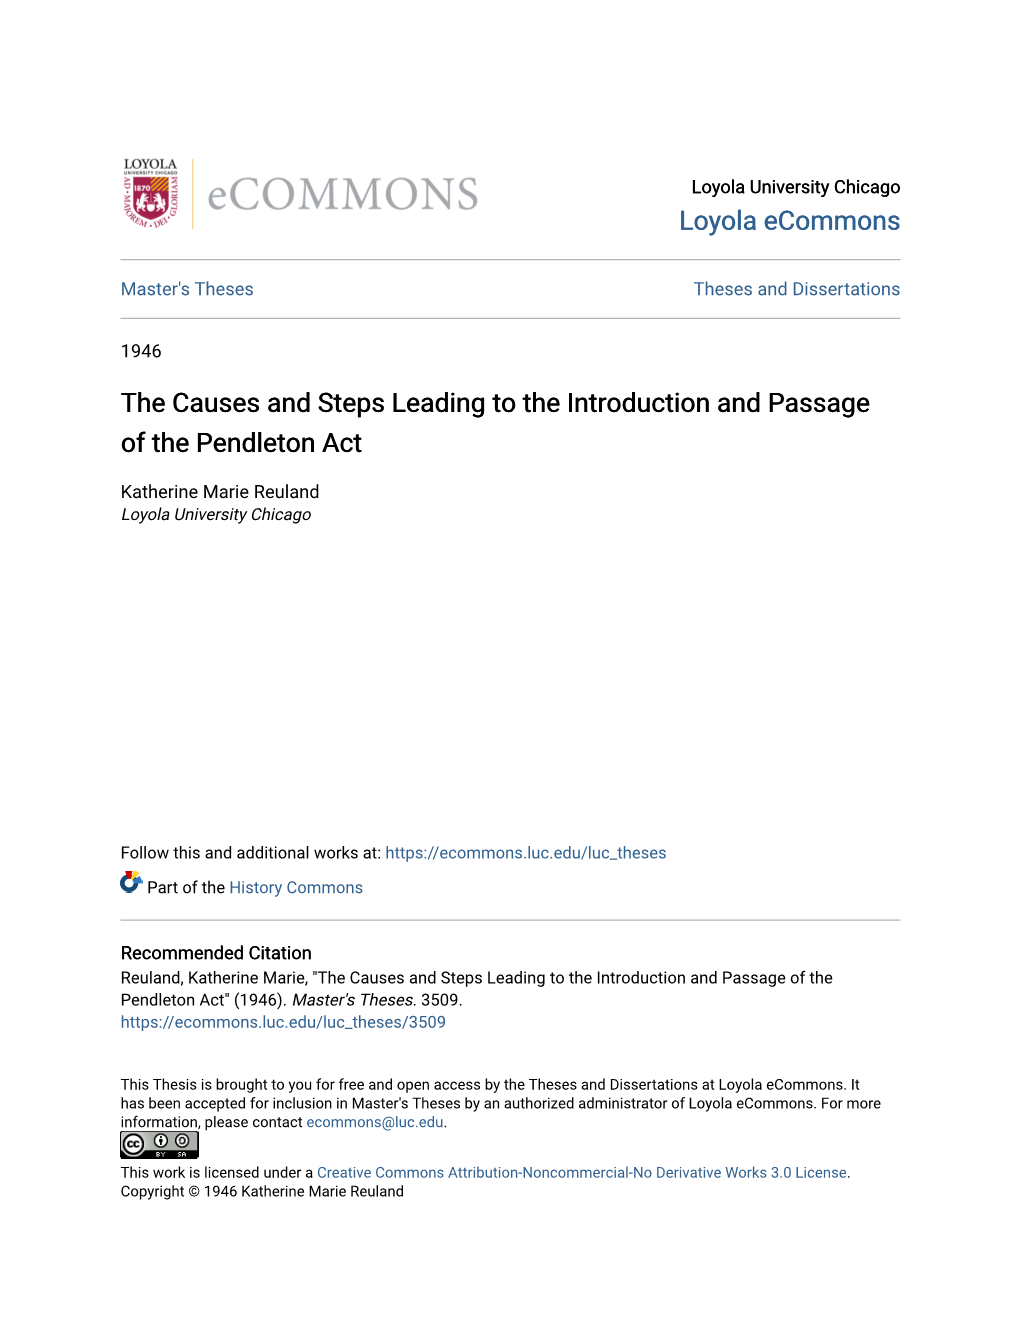 The Causes and Steps Leading to the Introduction and Passage of the Pendleton Act